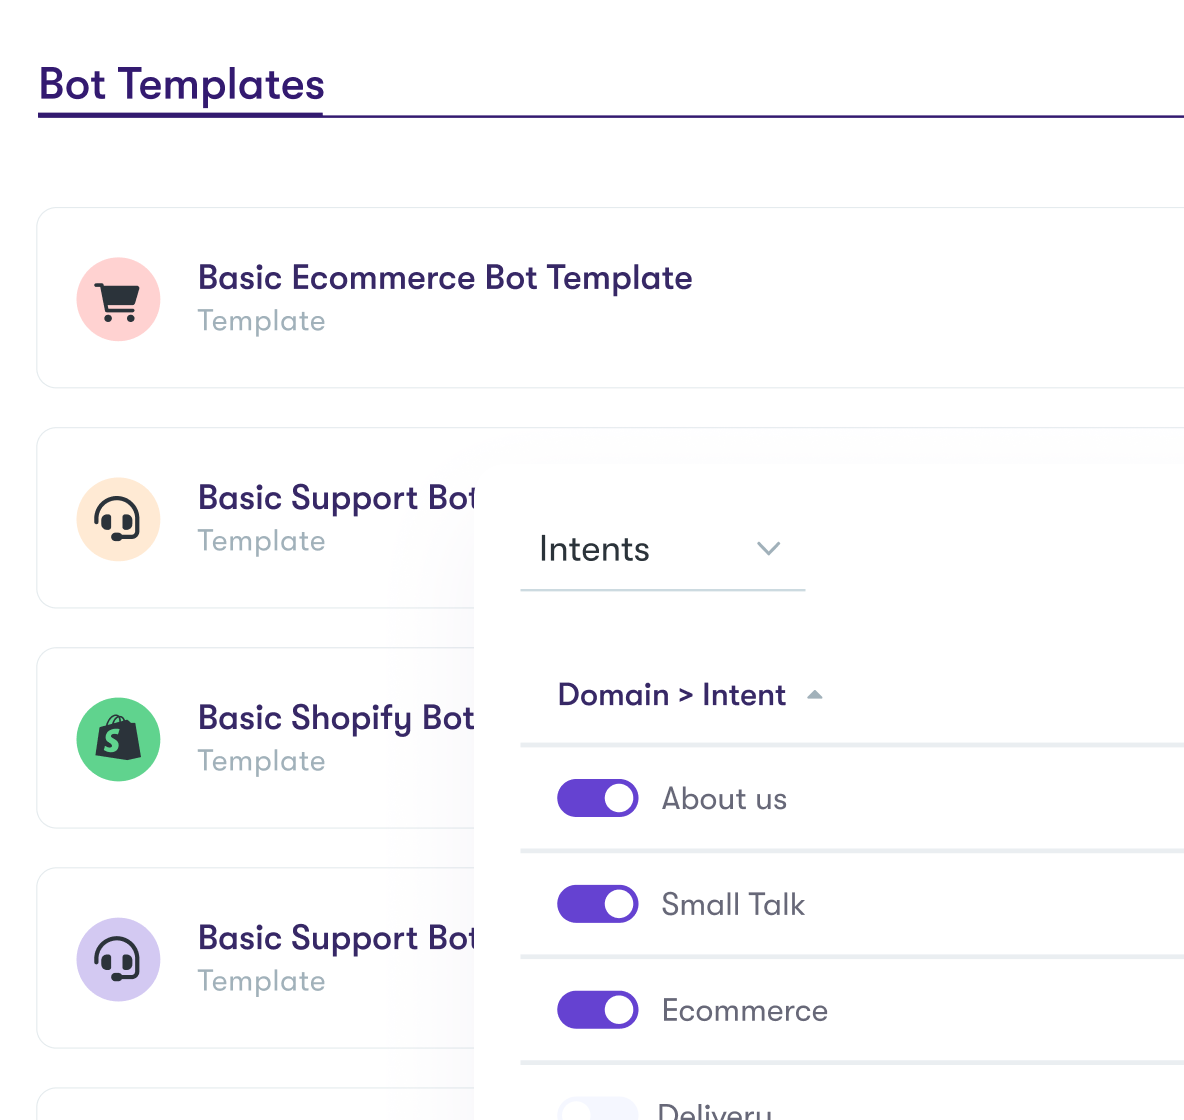 A screenshot of the Certainly bot templates, the NLU trainer, and a product from Joseph Joseph. 